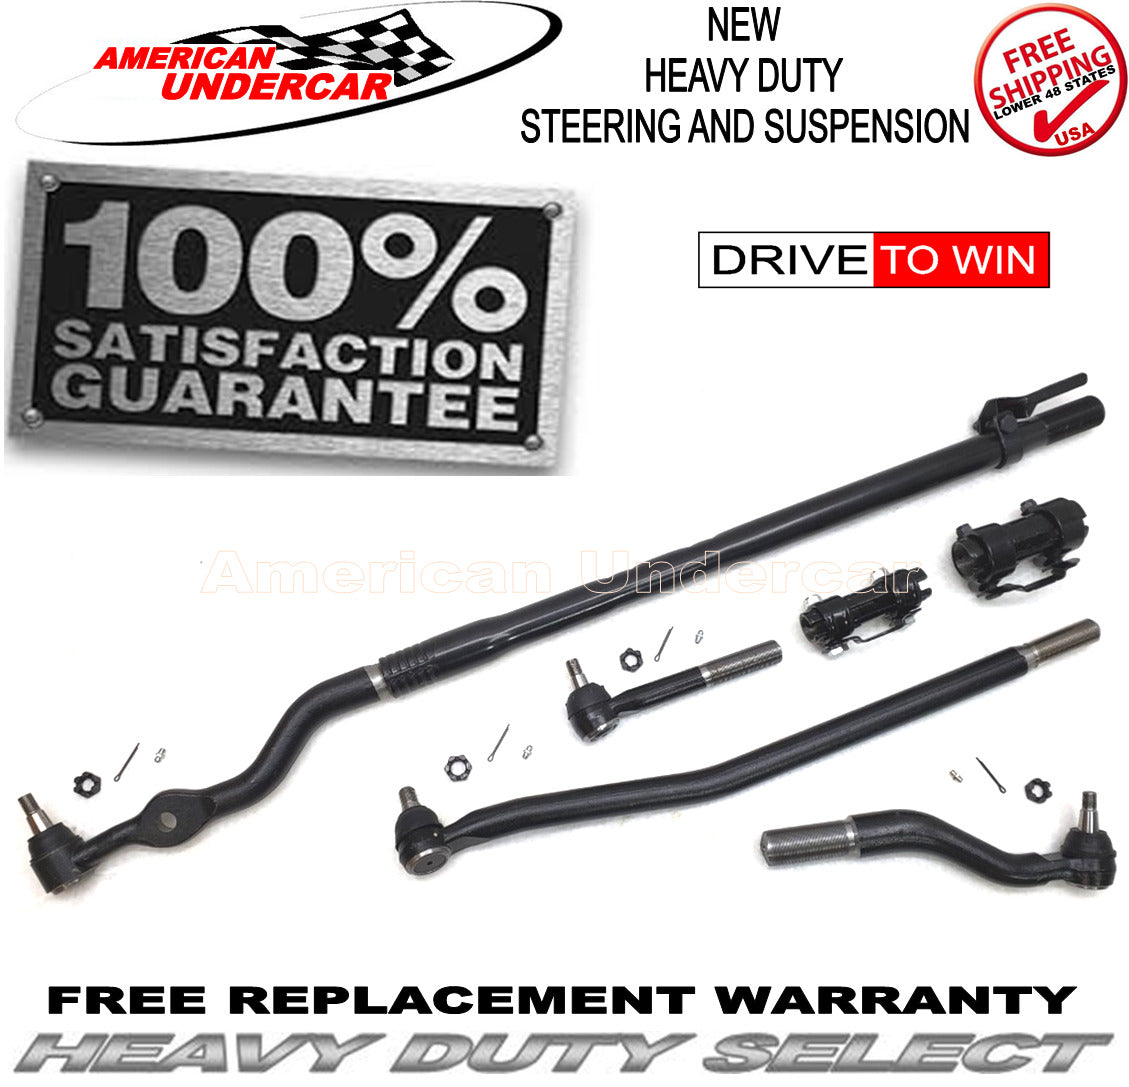 Ford F250 F350 4x4 Excursion 99-04 HD Drag Link Tie Rod Sleeve Steering Kit